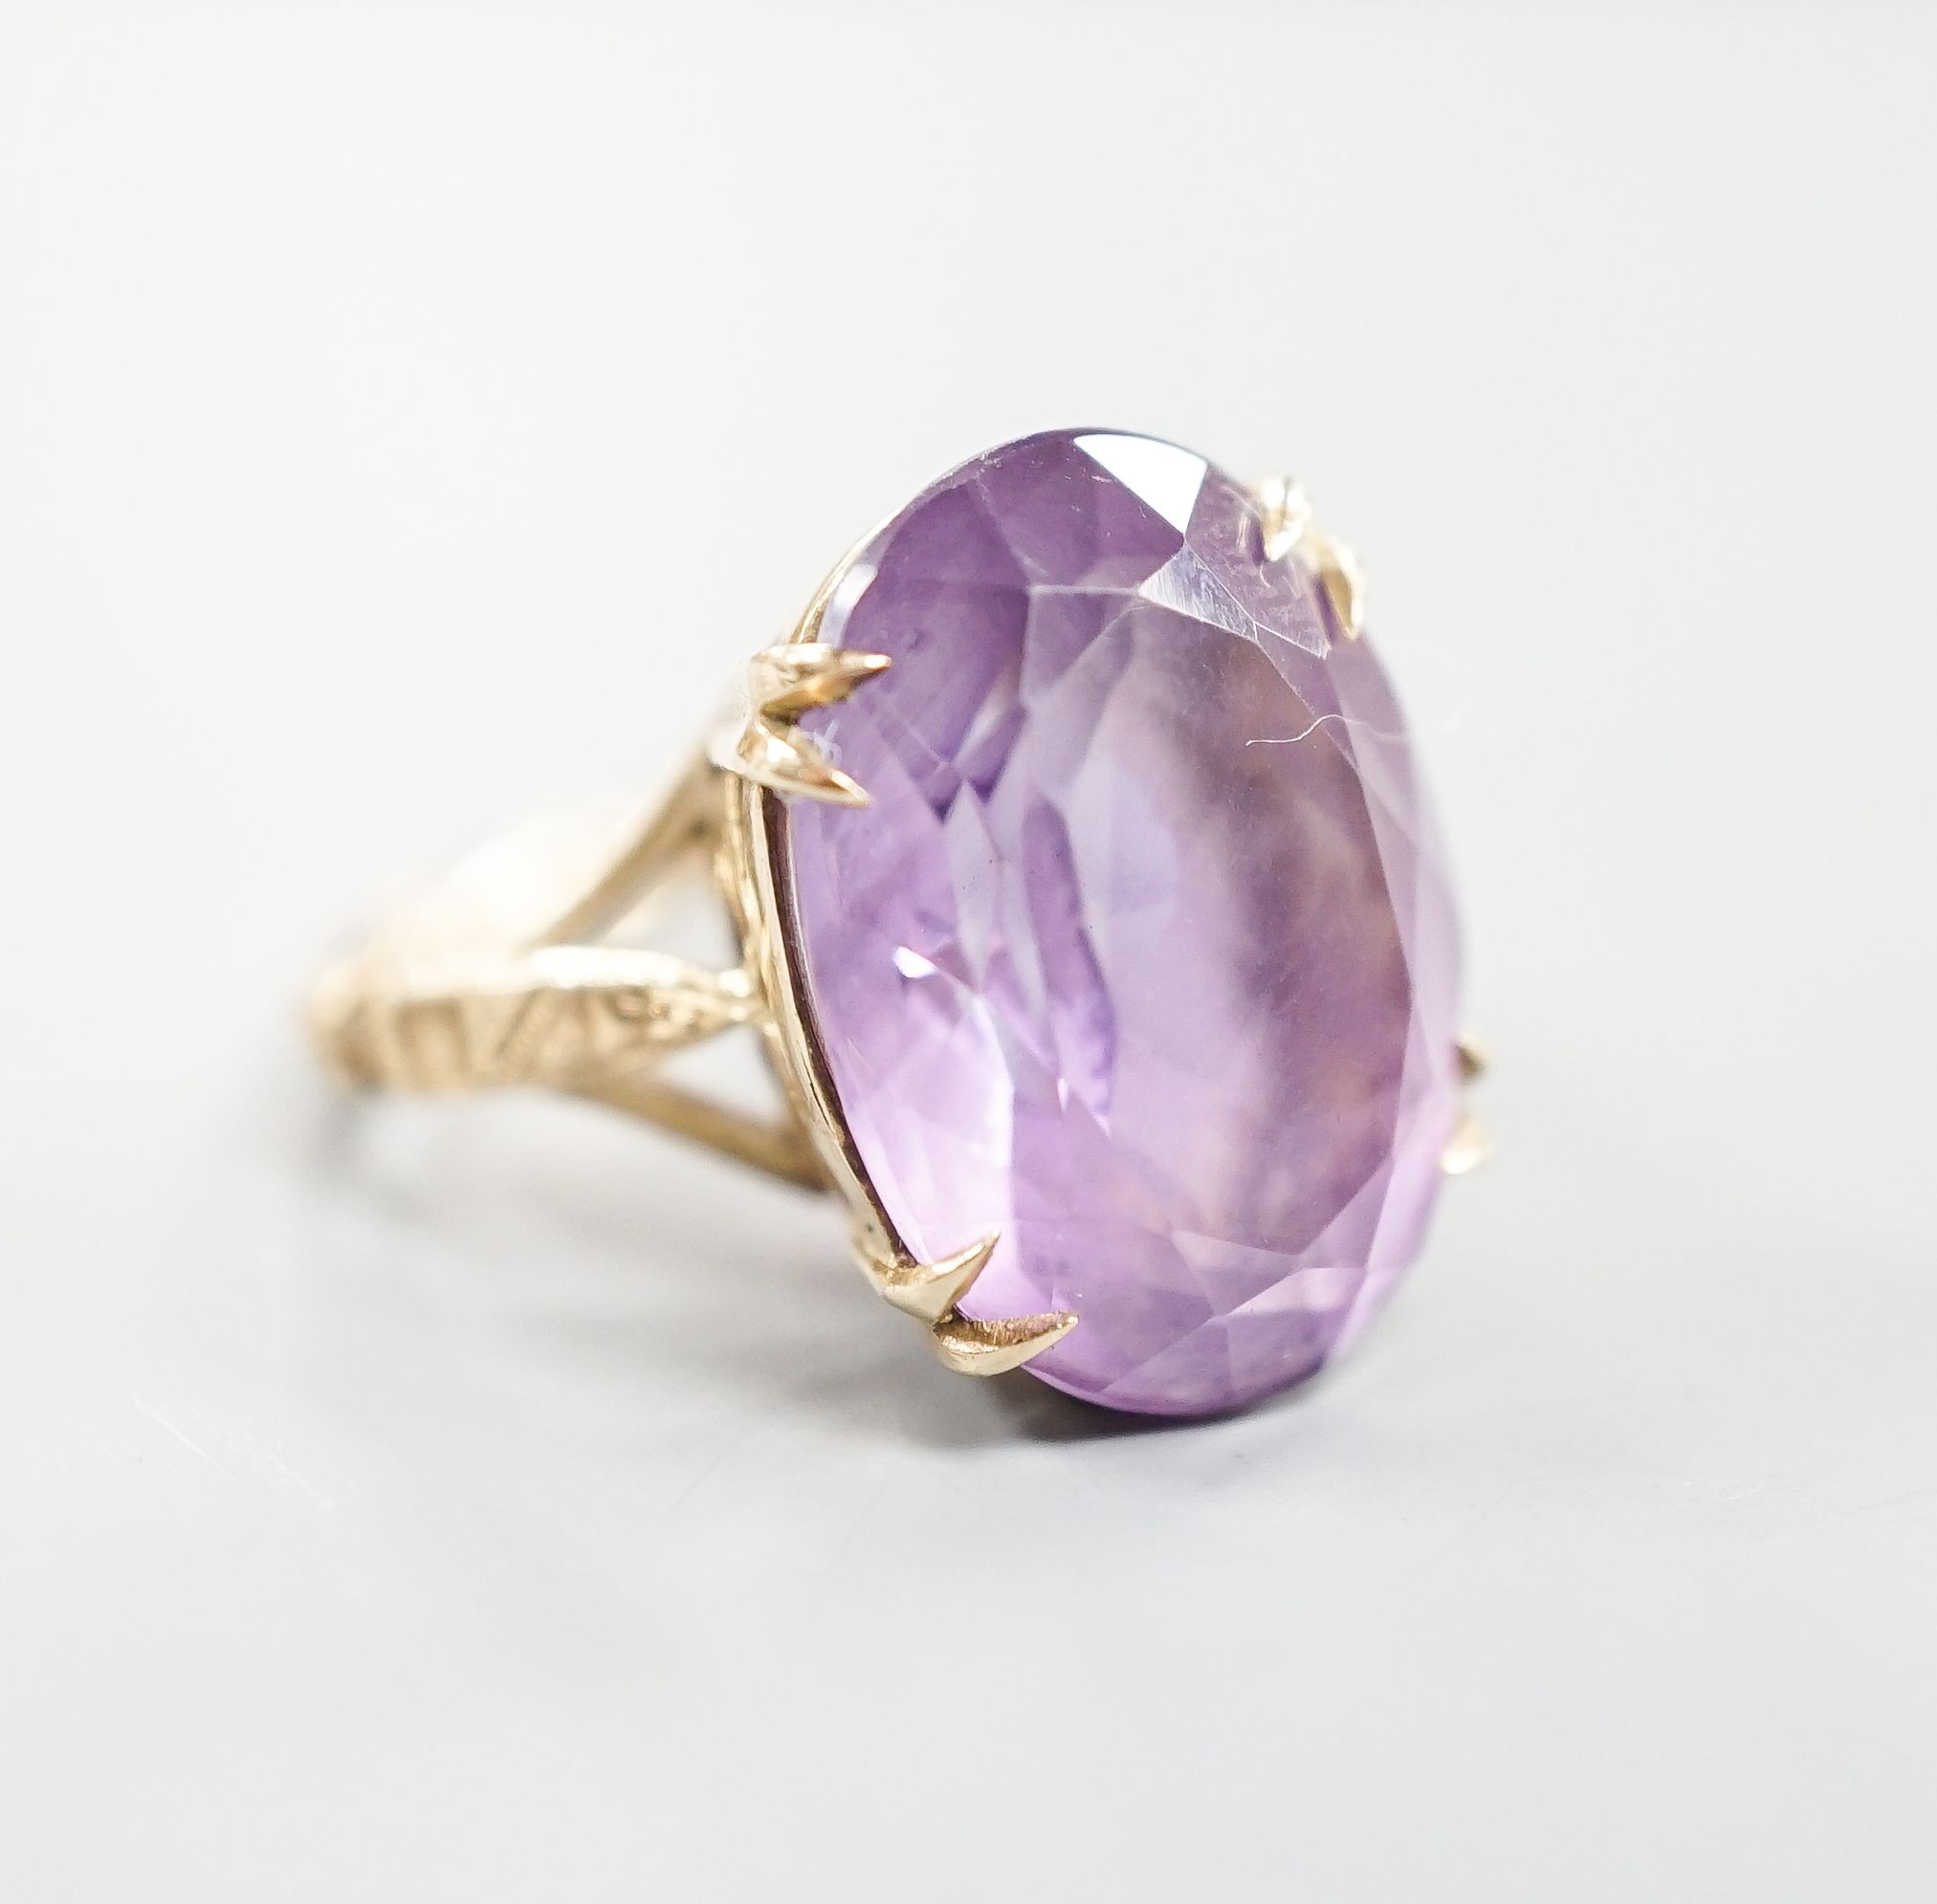 A modern 9ct gold and oval cut amethyst set dress ring, size L/M, gross weight 5.7 grams.